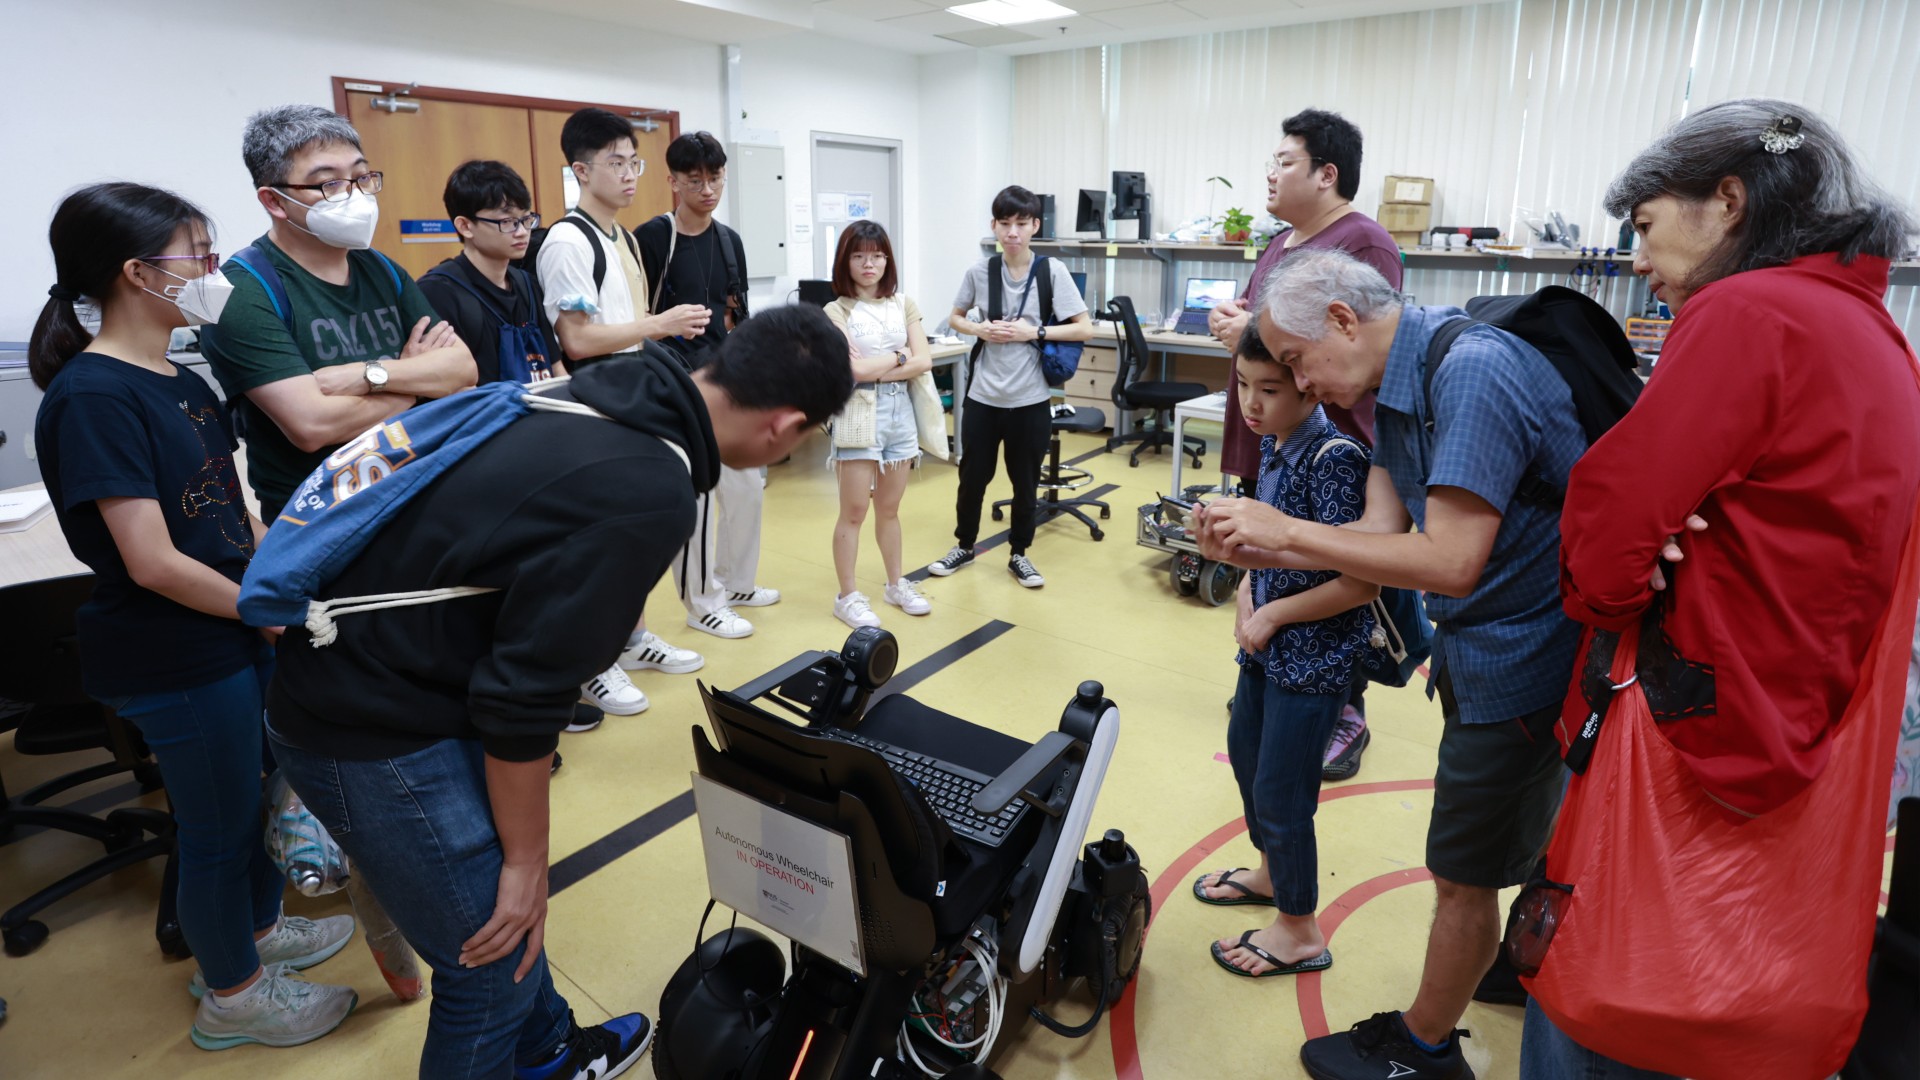 Participants were treated to a demonstration of various robotics projects from CDE’s Advanced Robotics Centre, including an autonomous wheelchair.